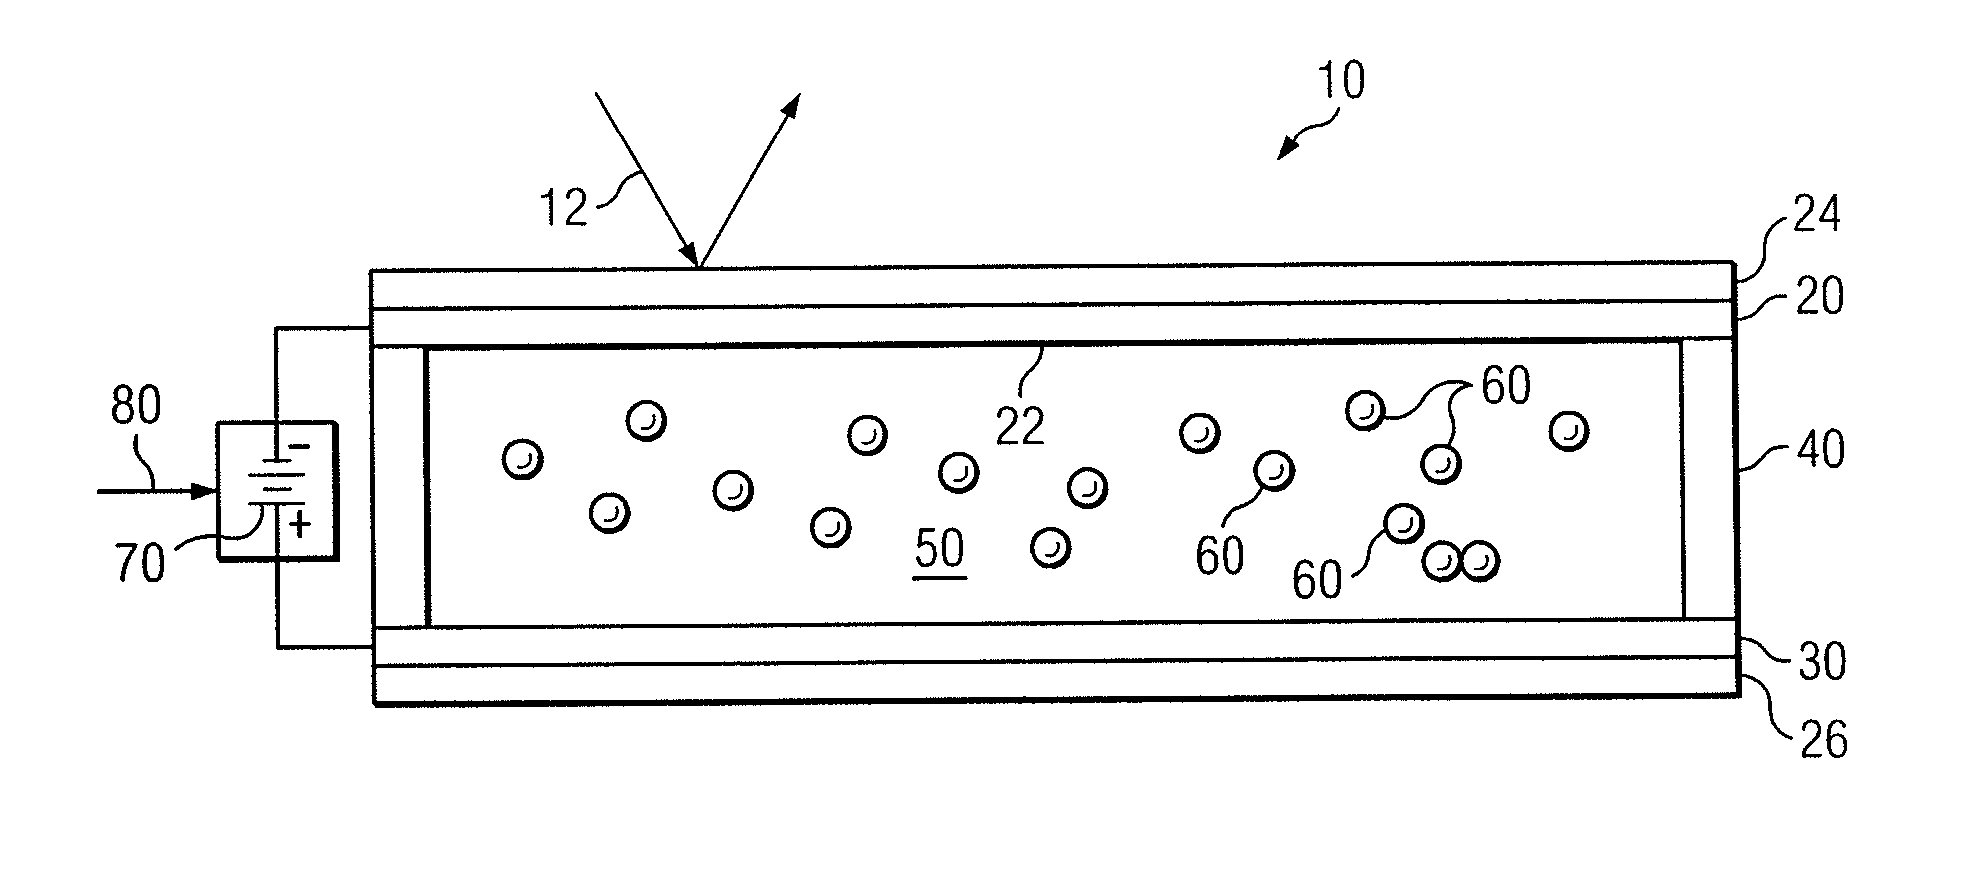 Method and apparatus for modulating light